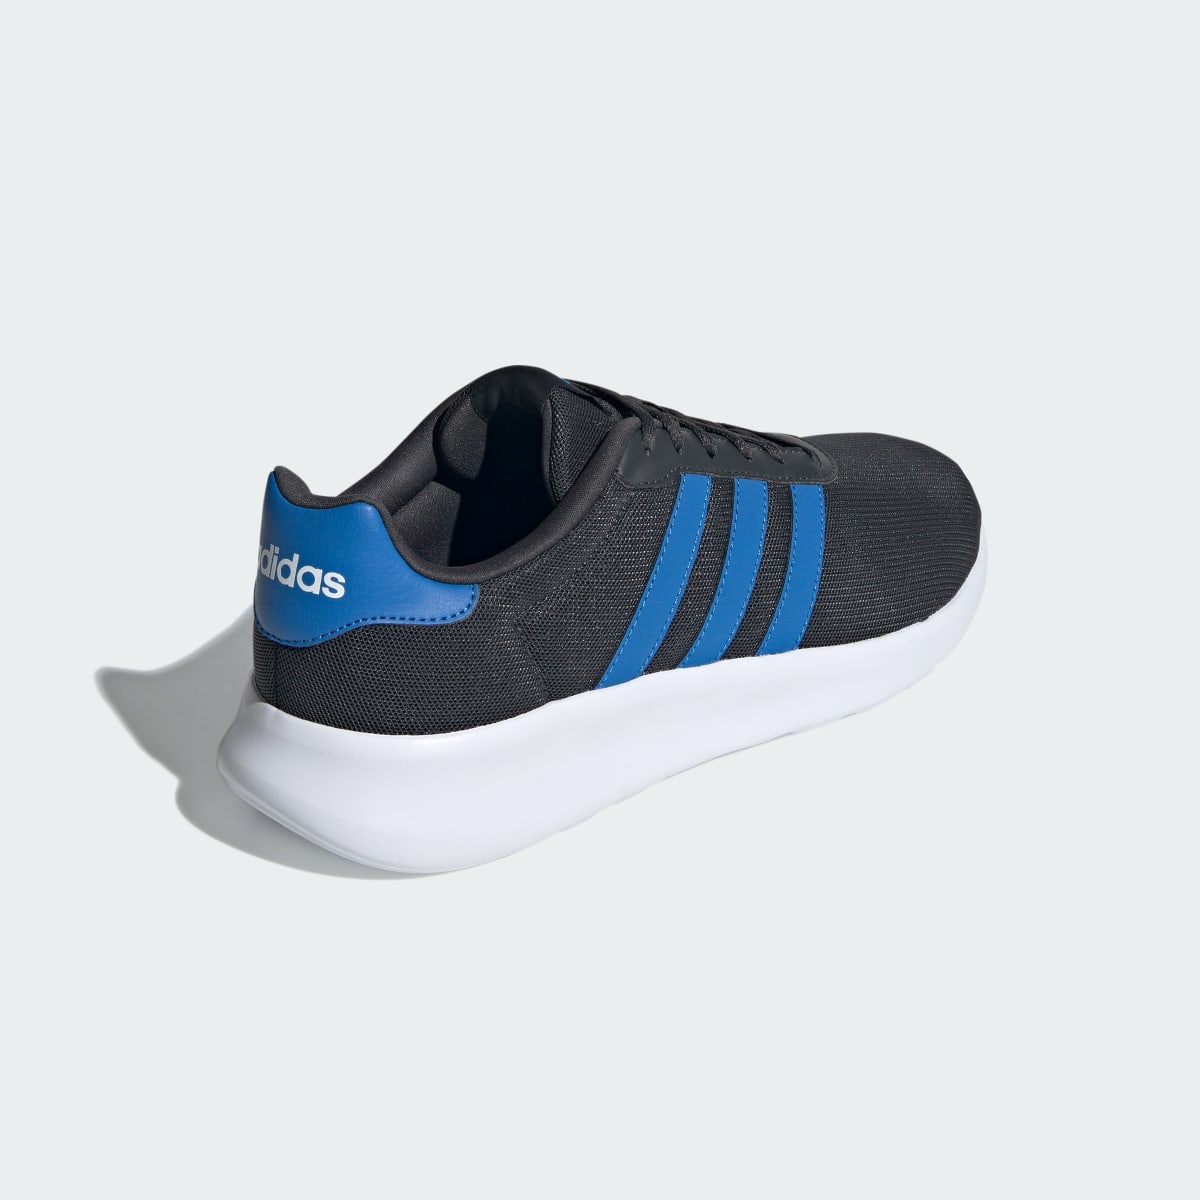 Adidas Lite Racer 3.0 Shoes. 6